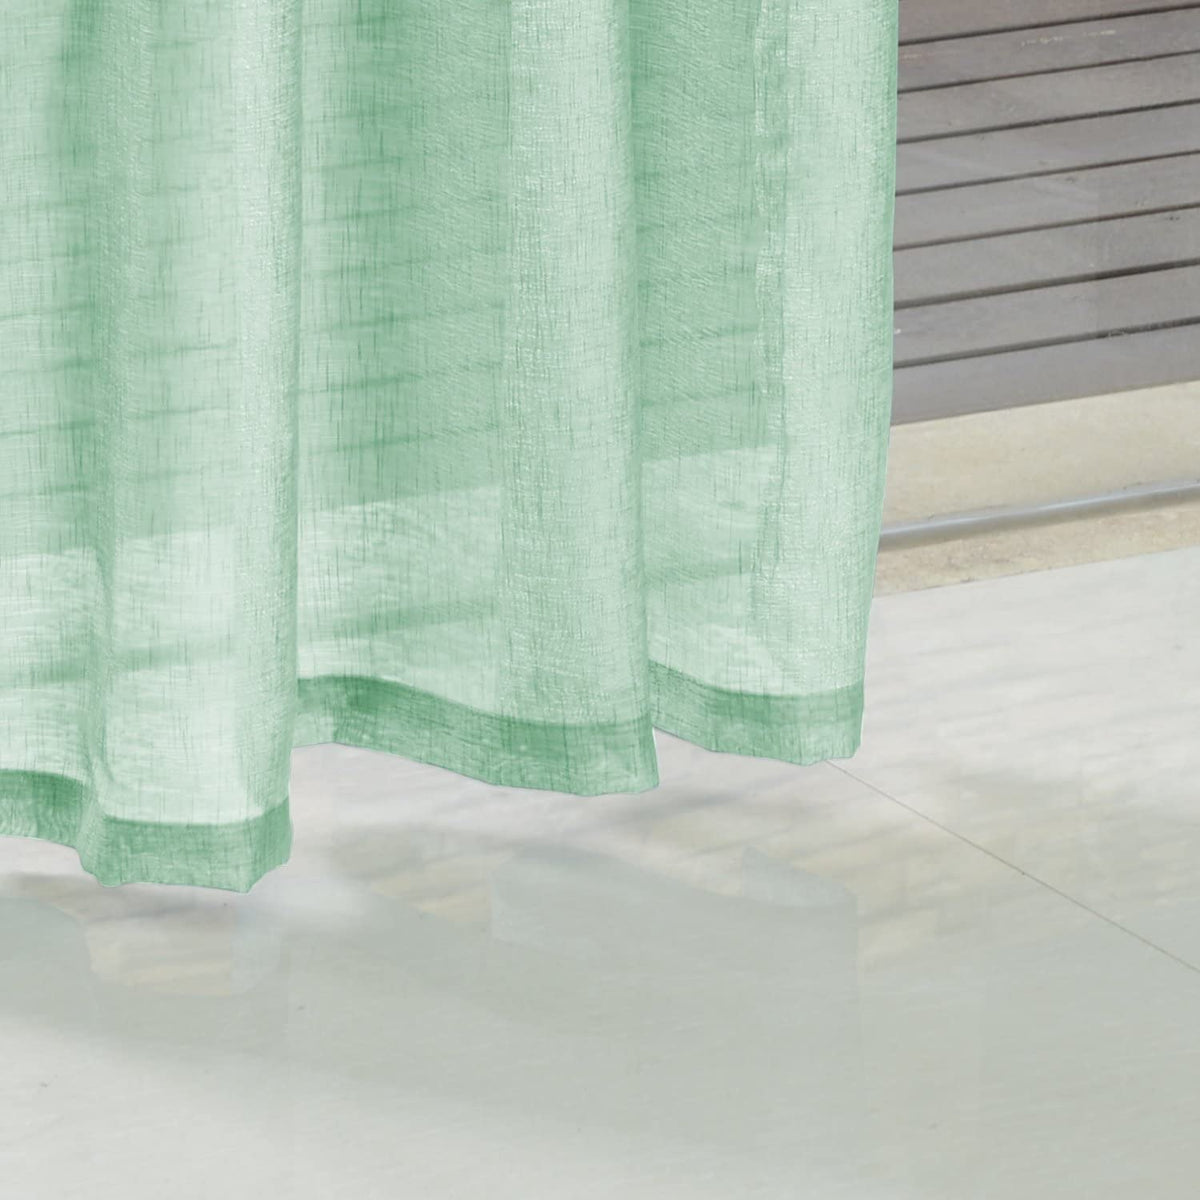 Sheer Window Panels For Home Decor Living Room Bedroom - Green 53 x 63 Inches